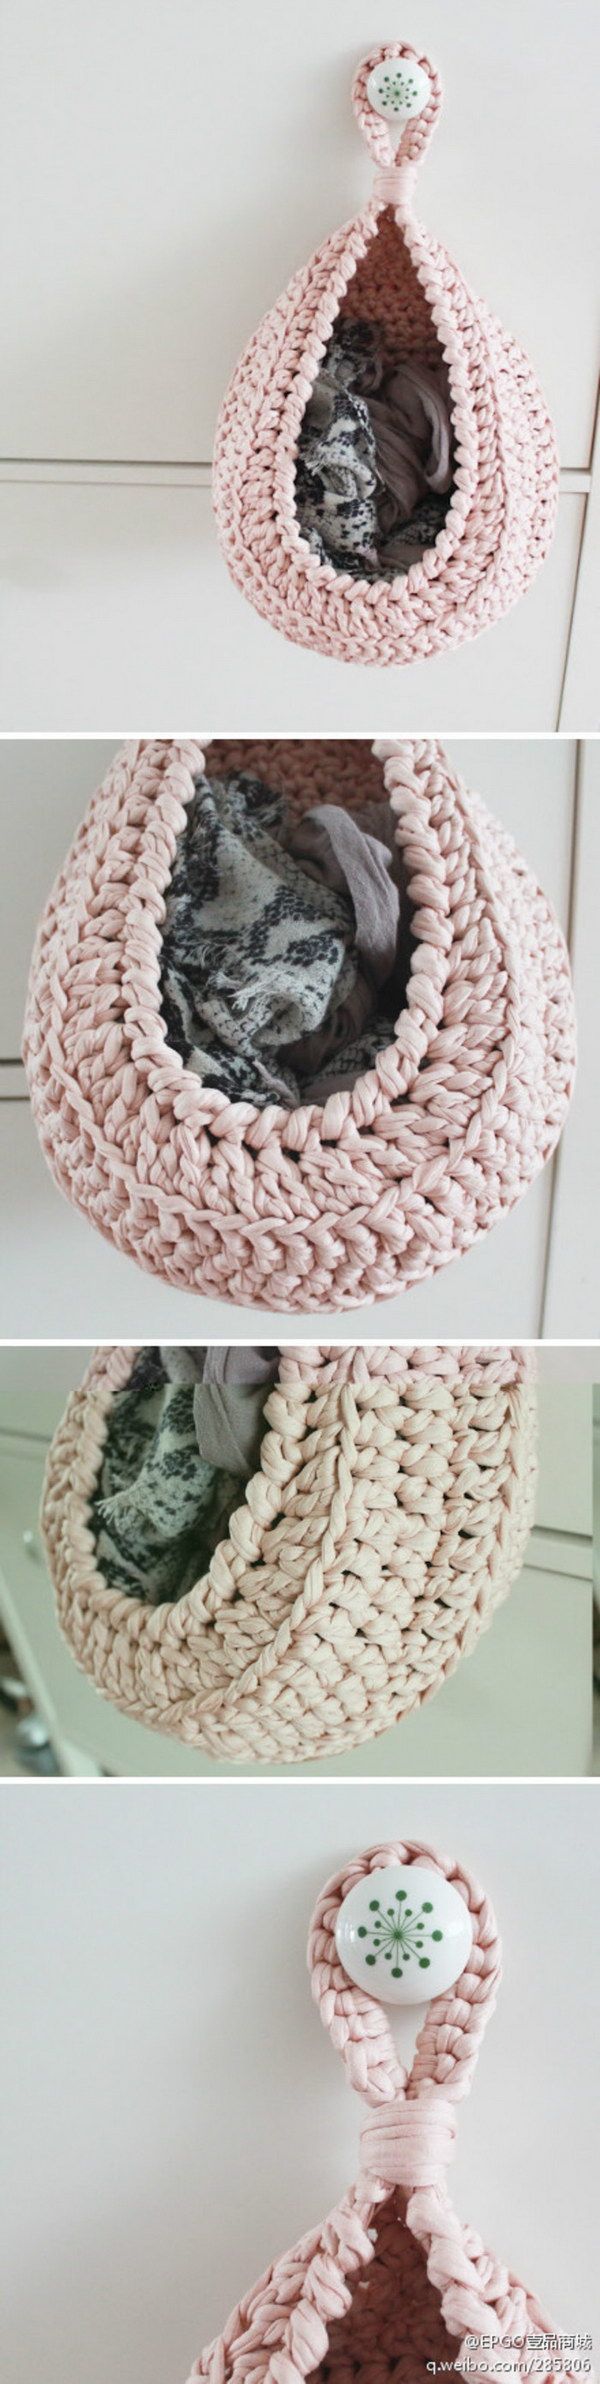 30-Easy-Crochet-Projects-with-Free-Patterns-for-Beginners.jpg